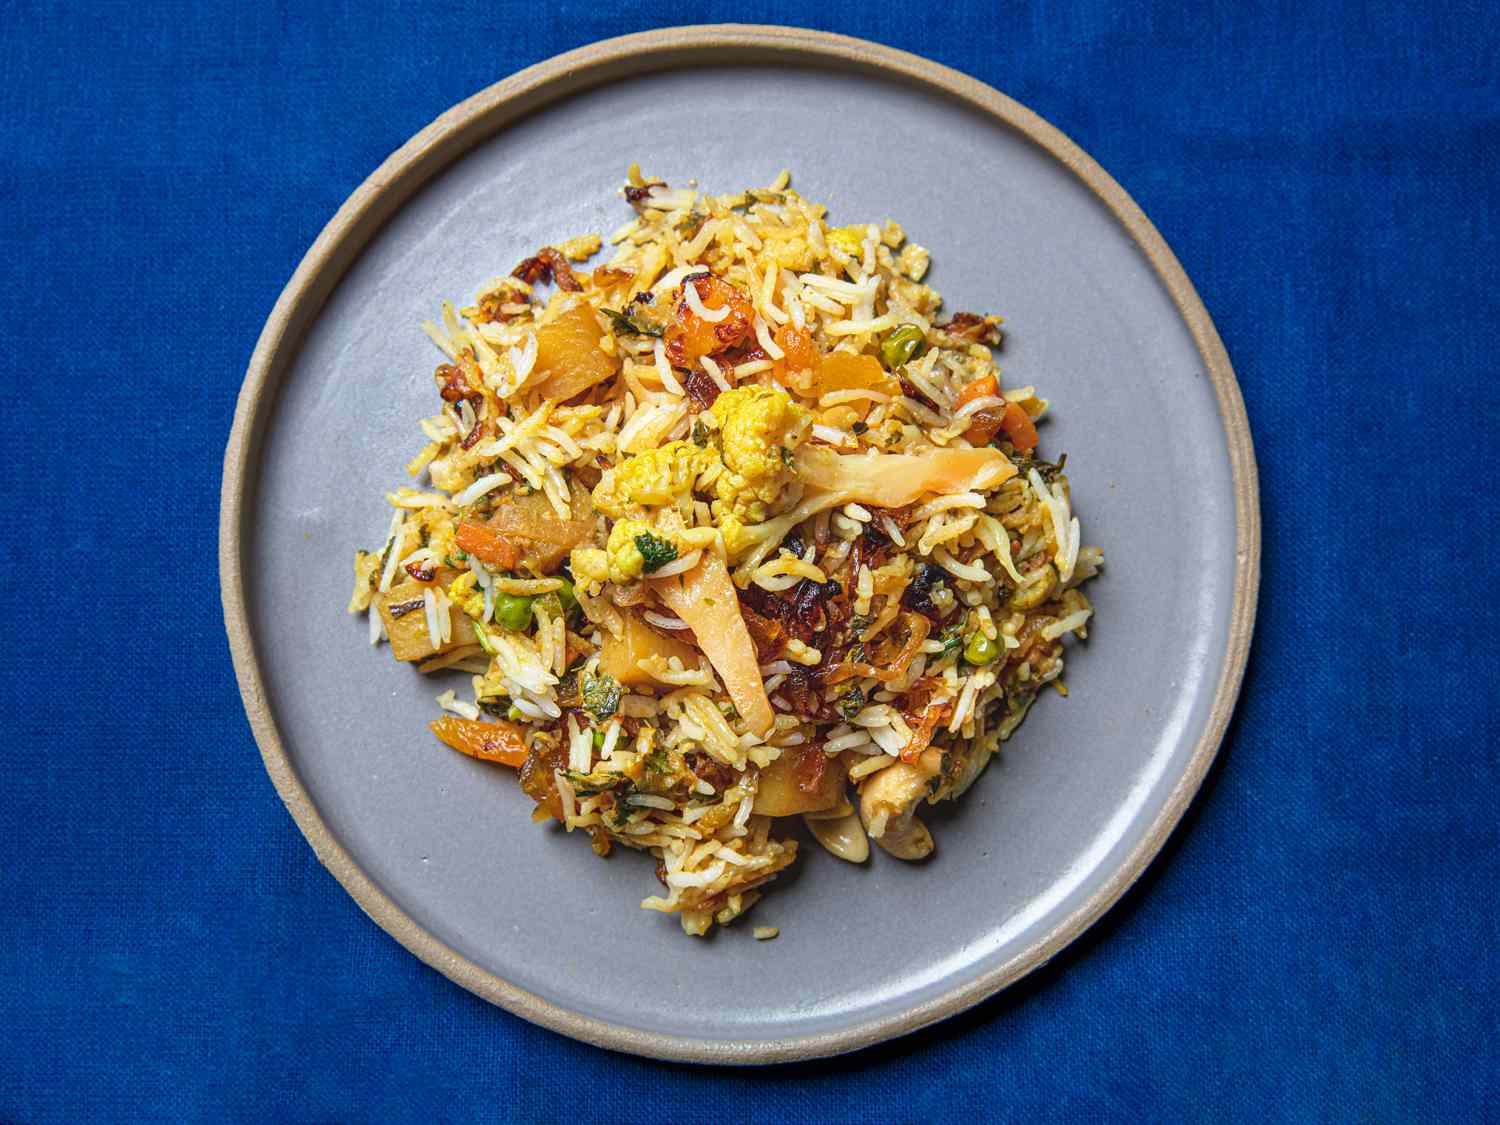 A plated portain of Biryani on a pale purple plate on a bright blue background